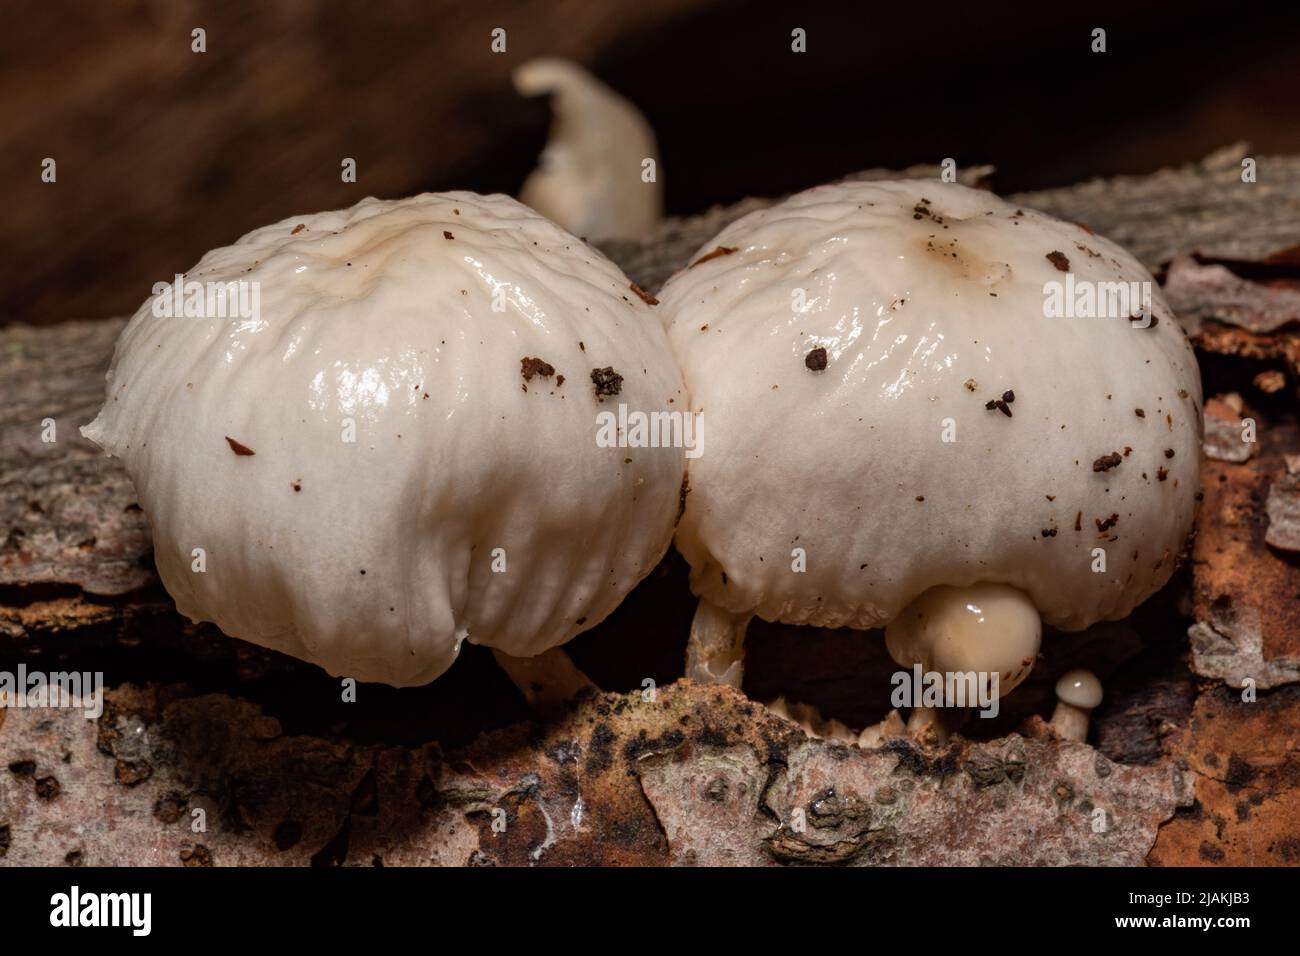 Two big white non-edible mushrooms growing on a tree trunk in the forest in spring Stock Photo